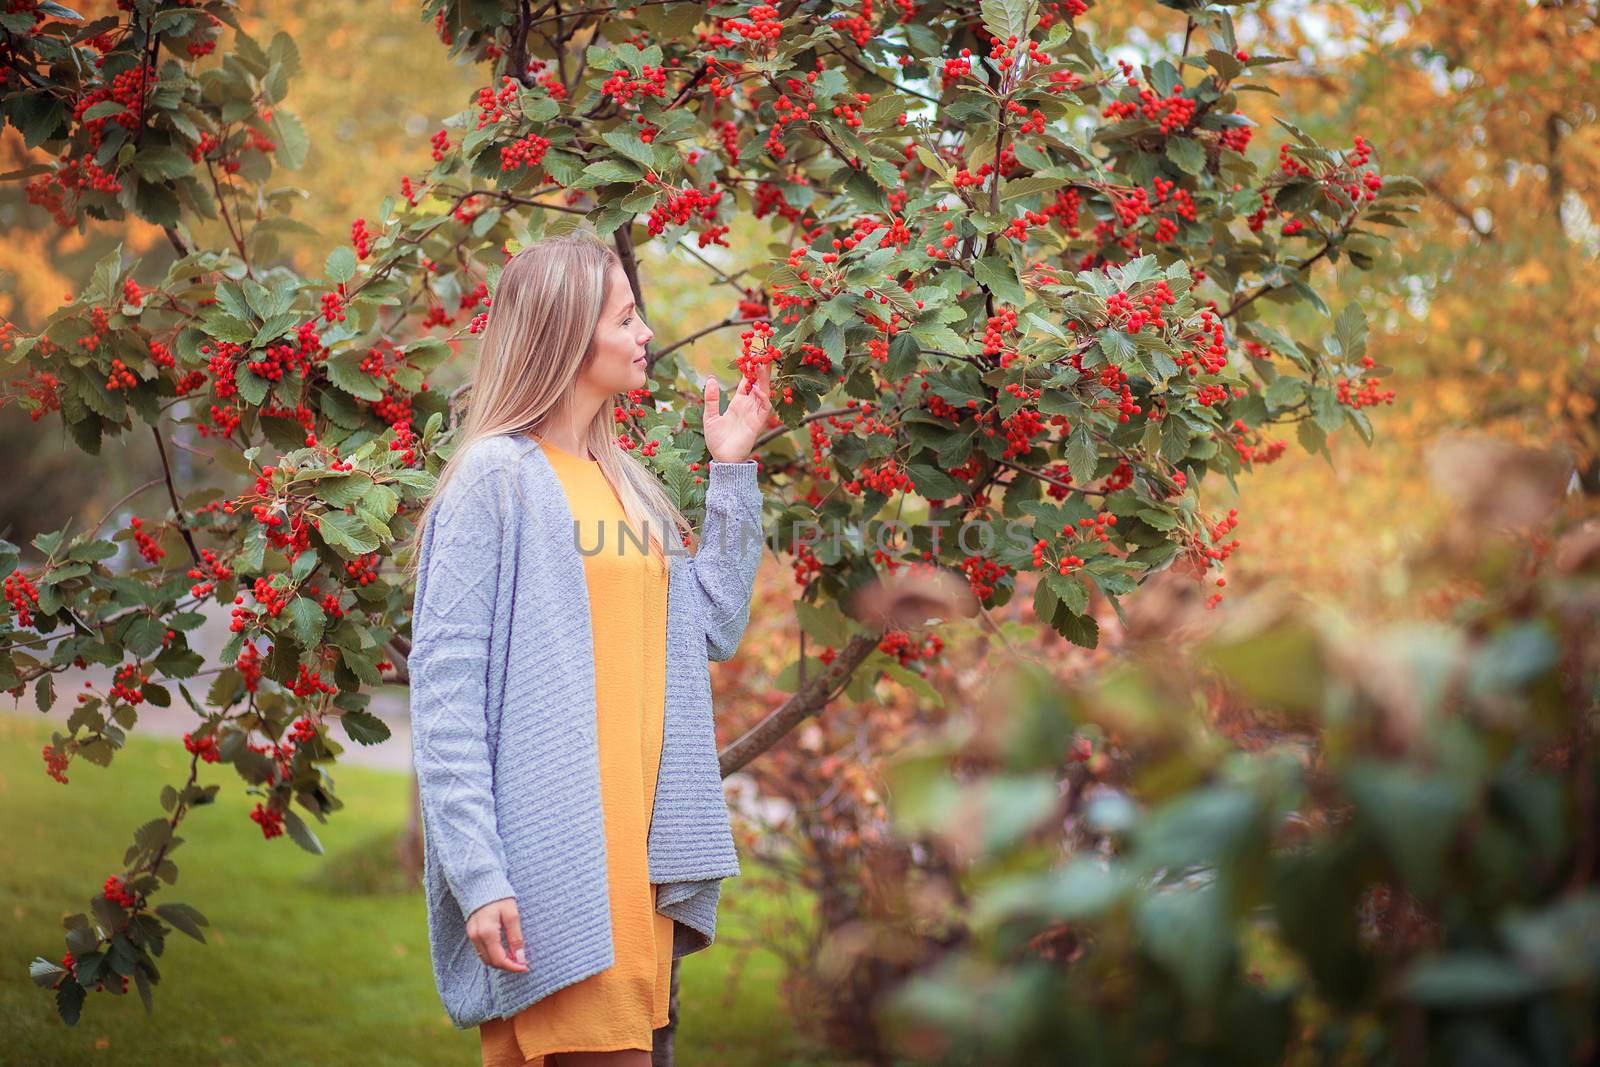 A young girl in a gray knitted sweater walks in the autumn park and looks at red berries by borisenkoket